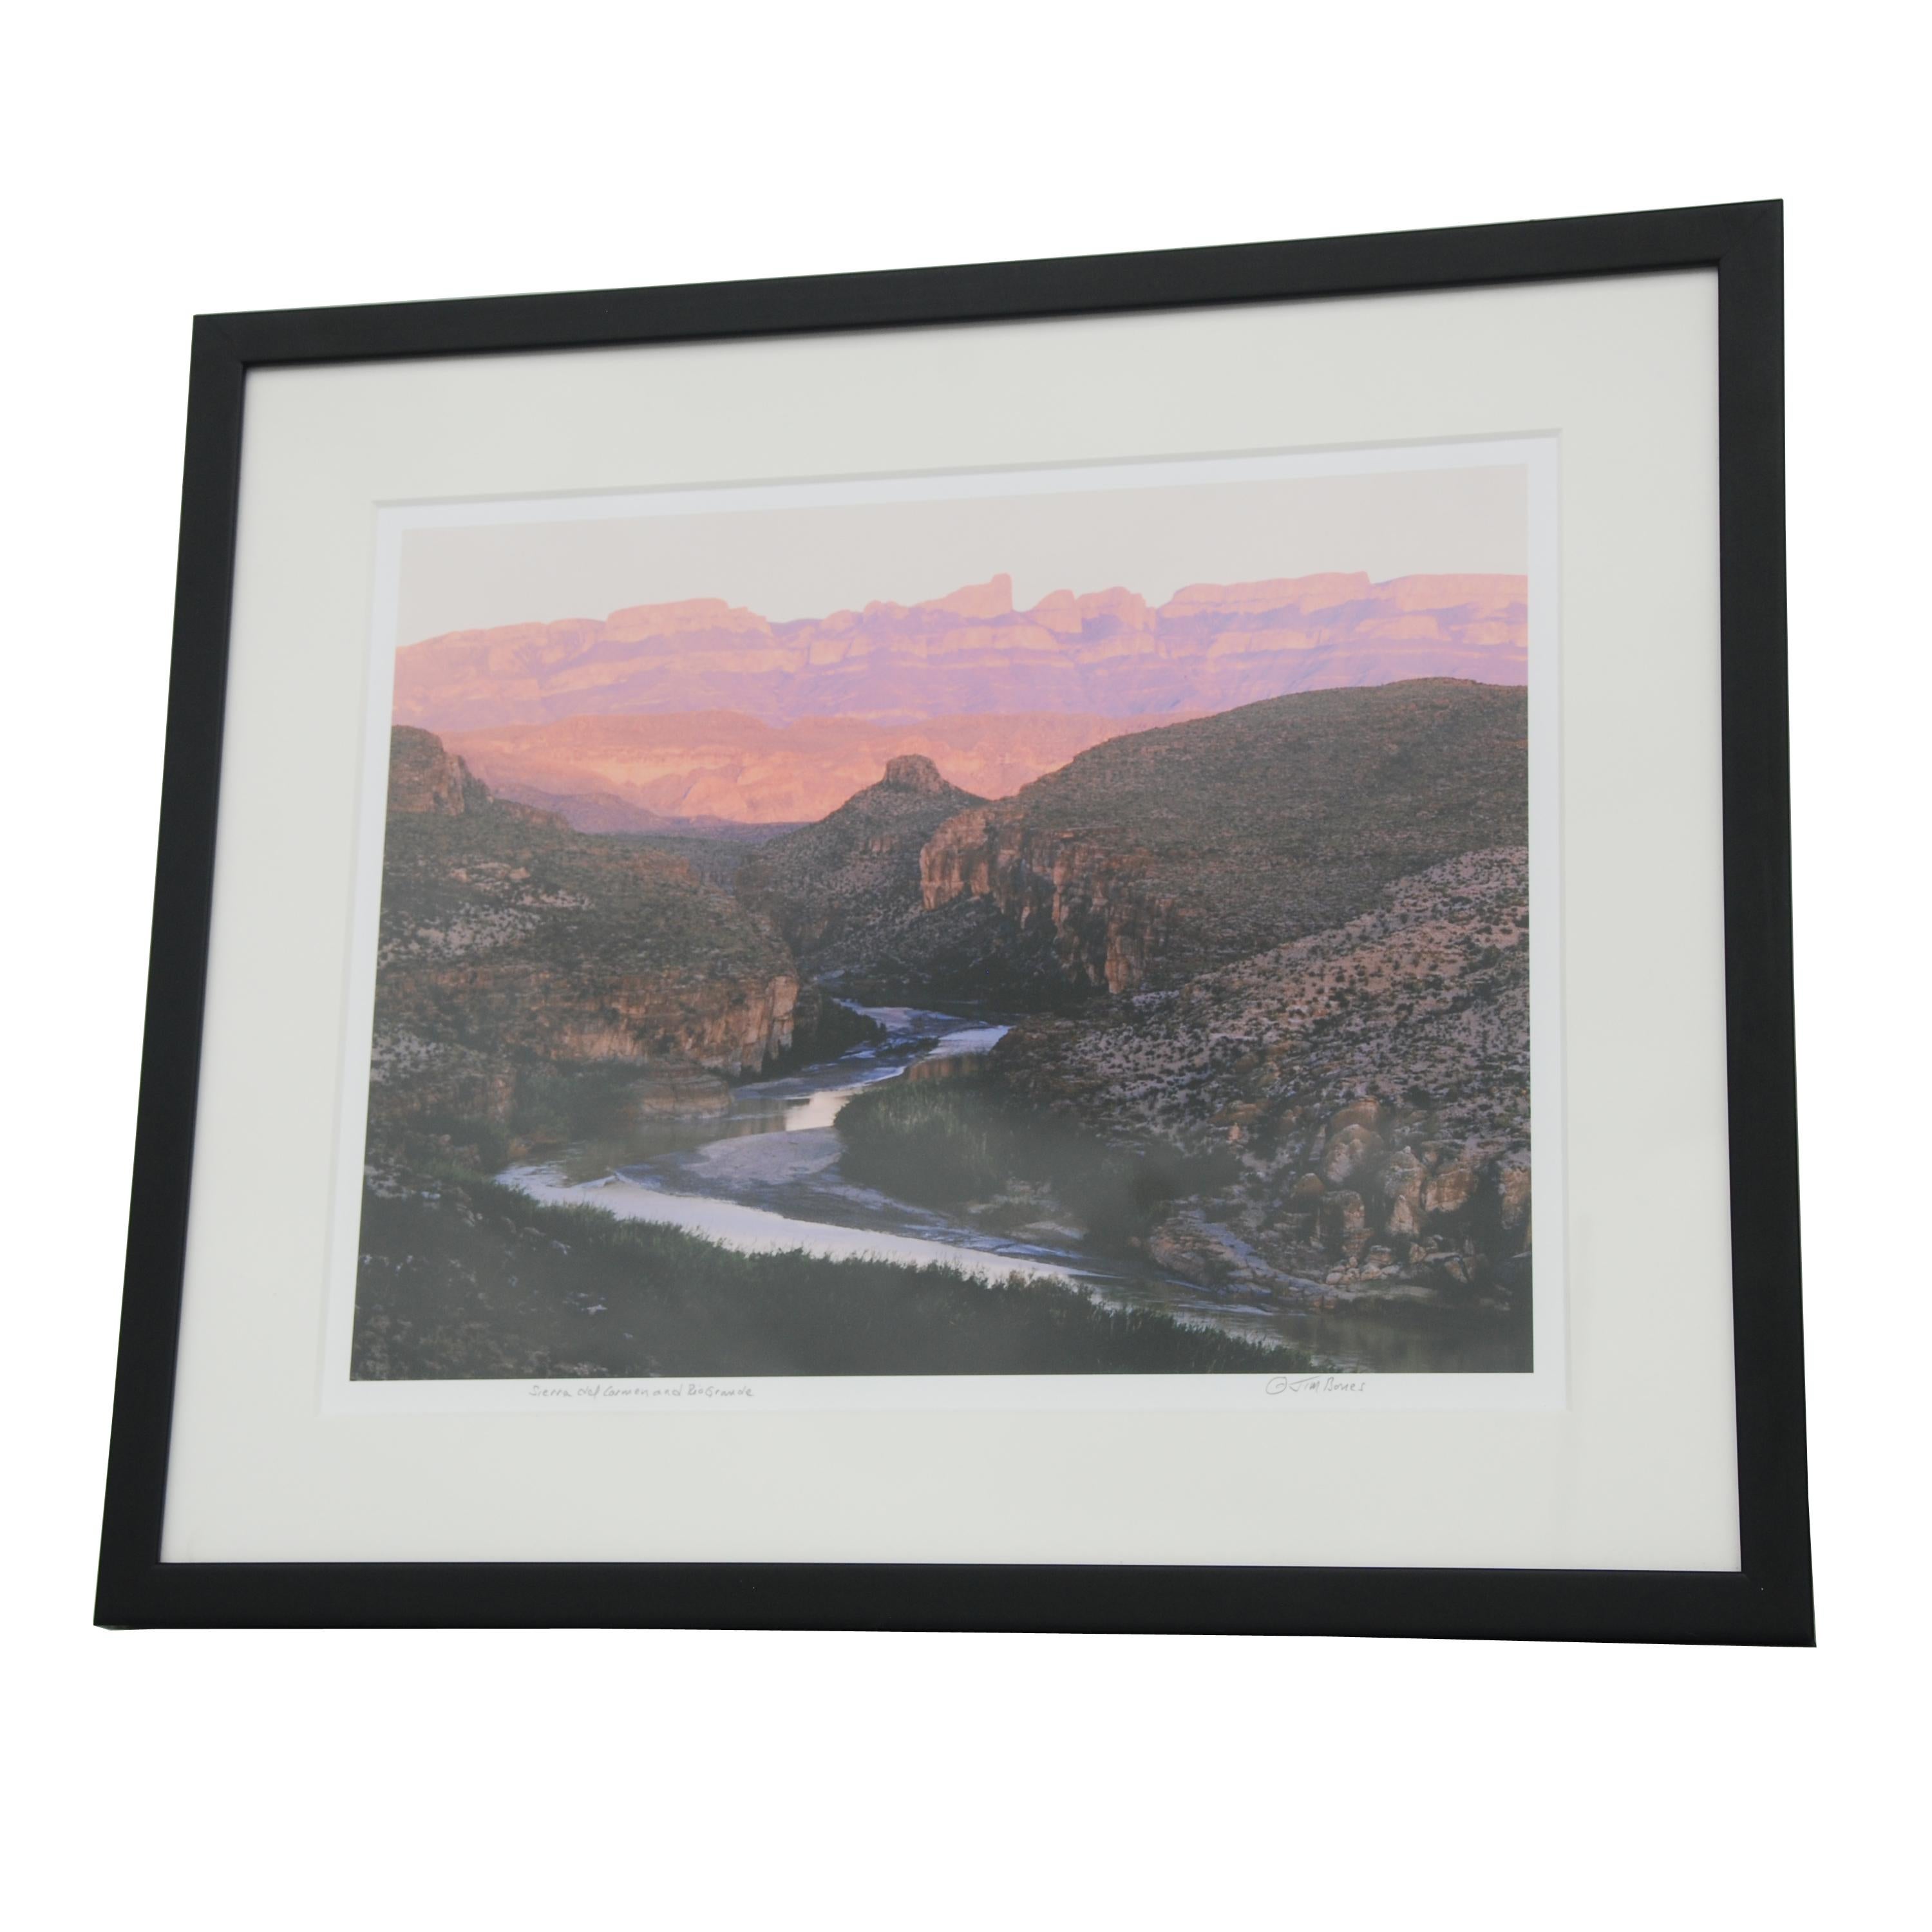 Original photograph, signed by Jim Bones. Photo depicts a gorgeous view of Sierra del Carmen in Mexico, as the Rio Grande runs through it. Titled 